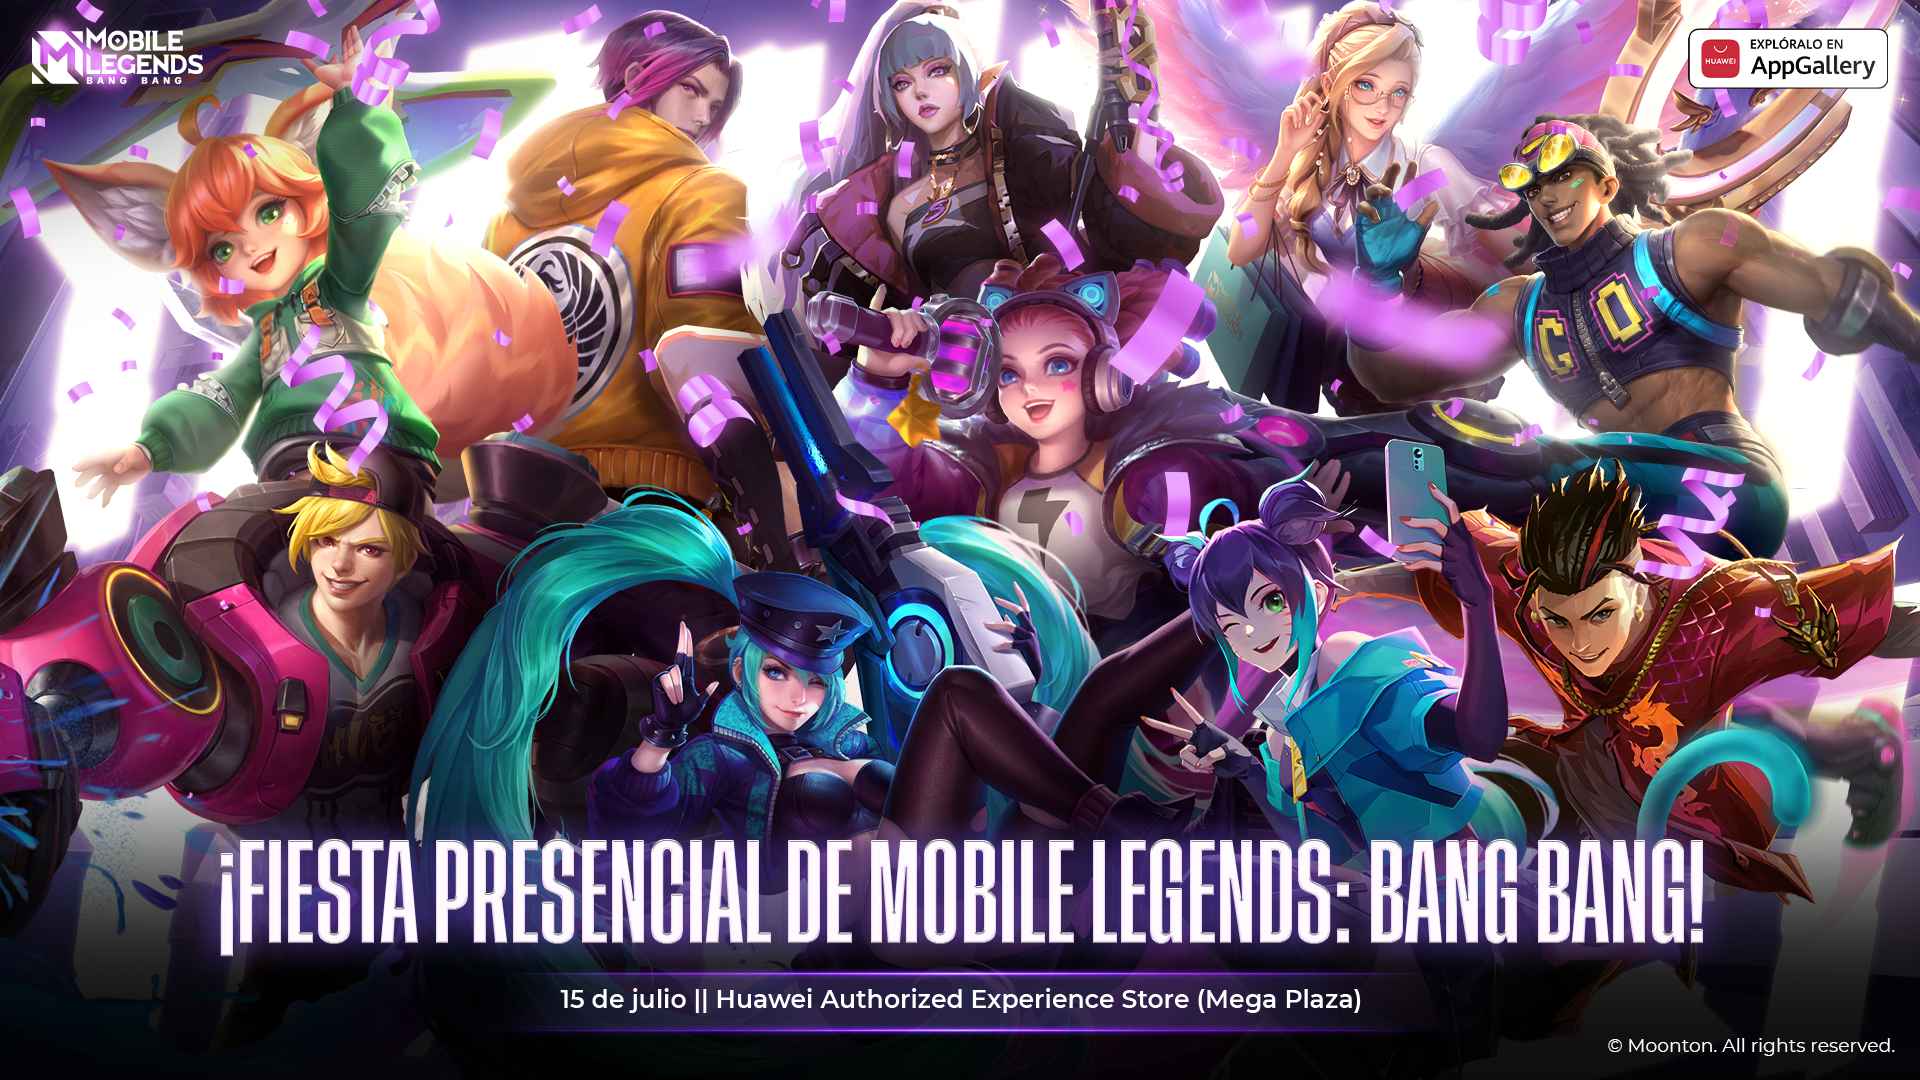 Mobile Legends, Huawei